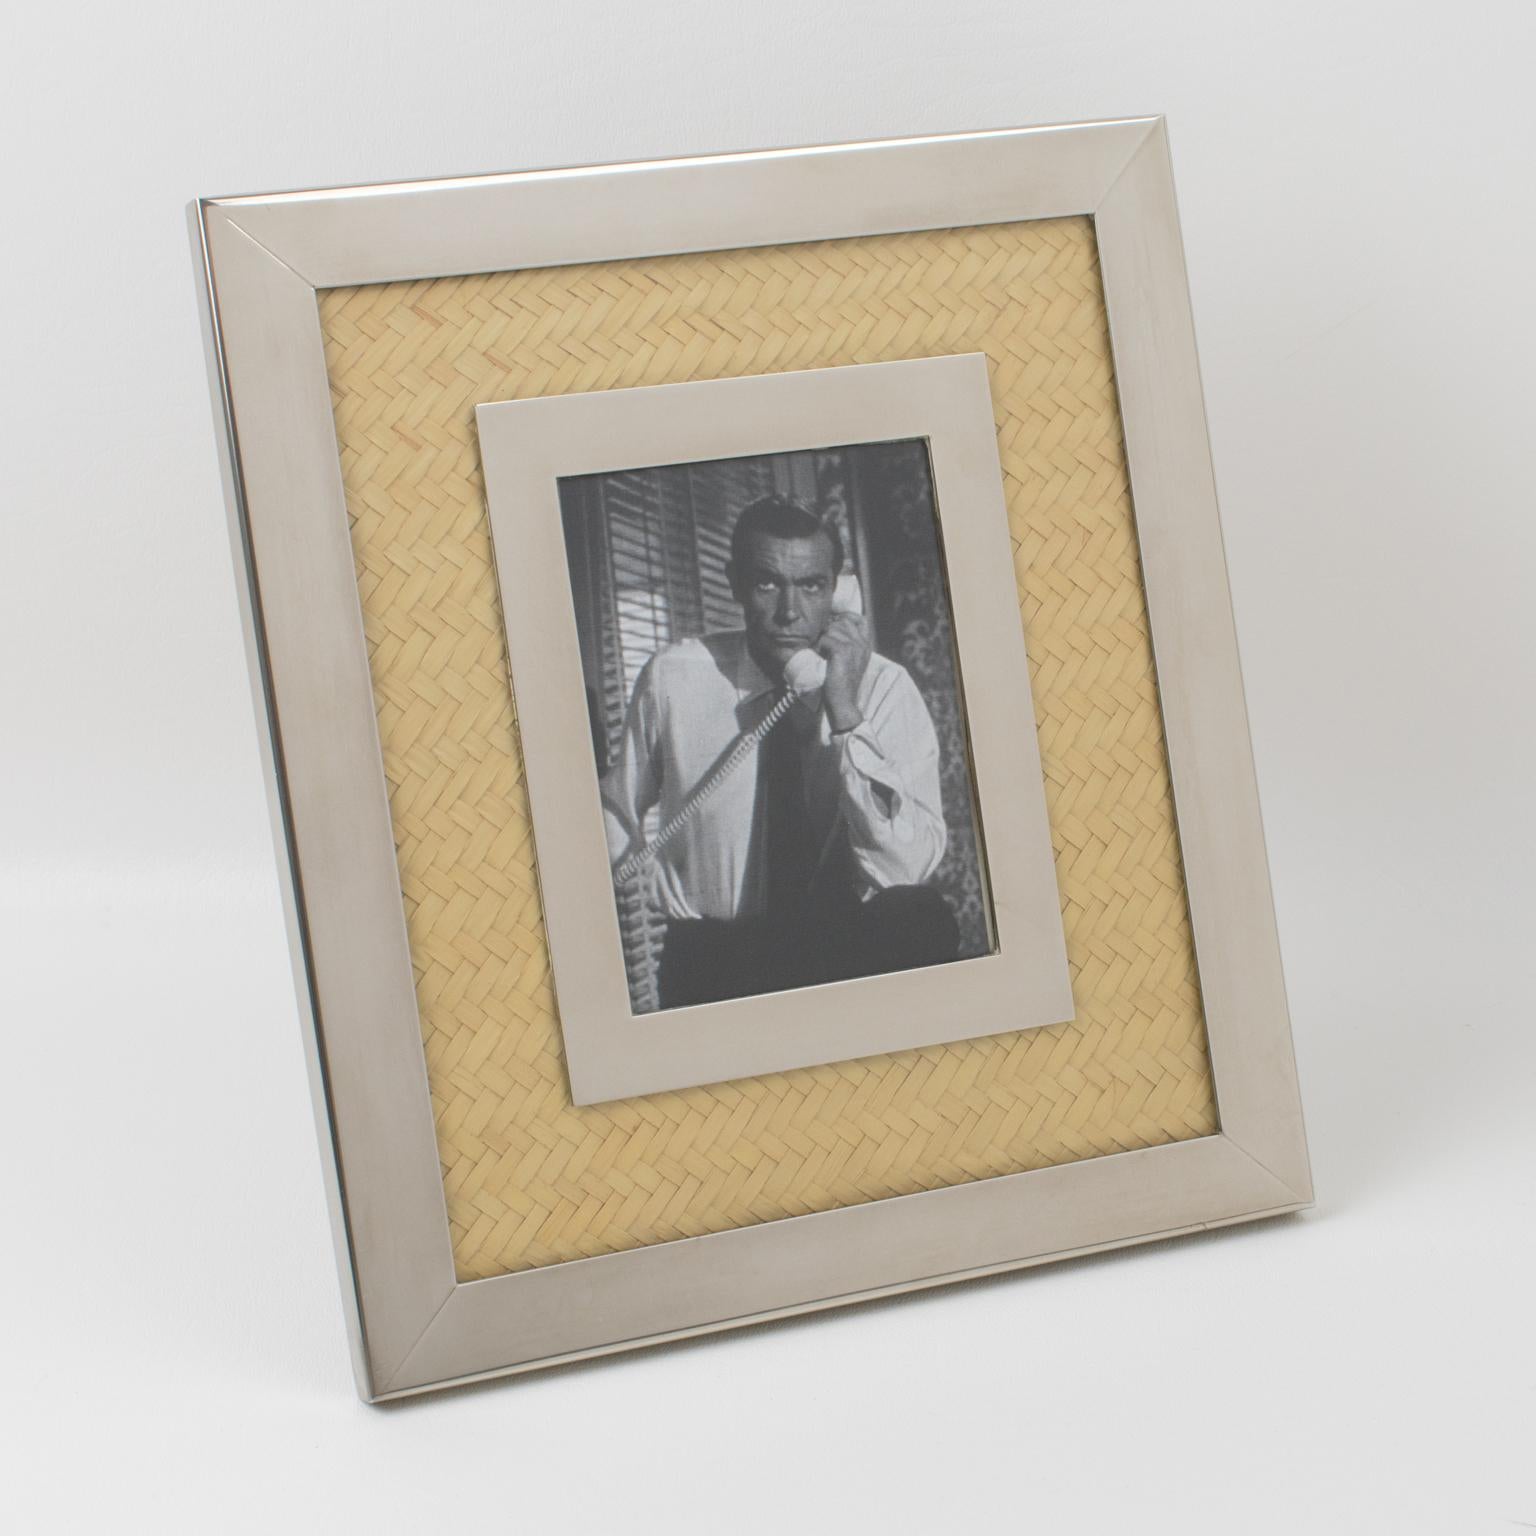 This elegant 1970s Italian design picture photo frame features chromed metal and straw marquetry combinations. The metal easel at the back has a rotating system that allows the frame to be placed in a landscape or portrait position. The back is in